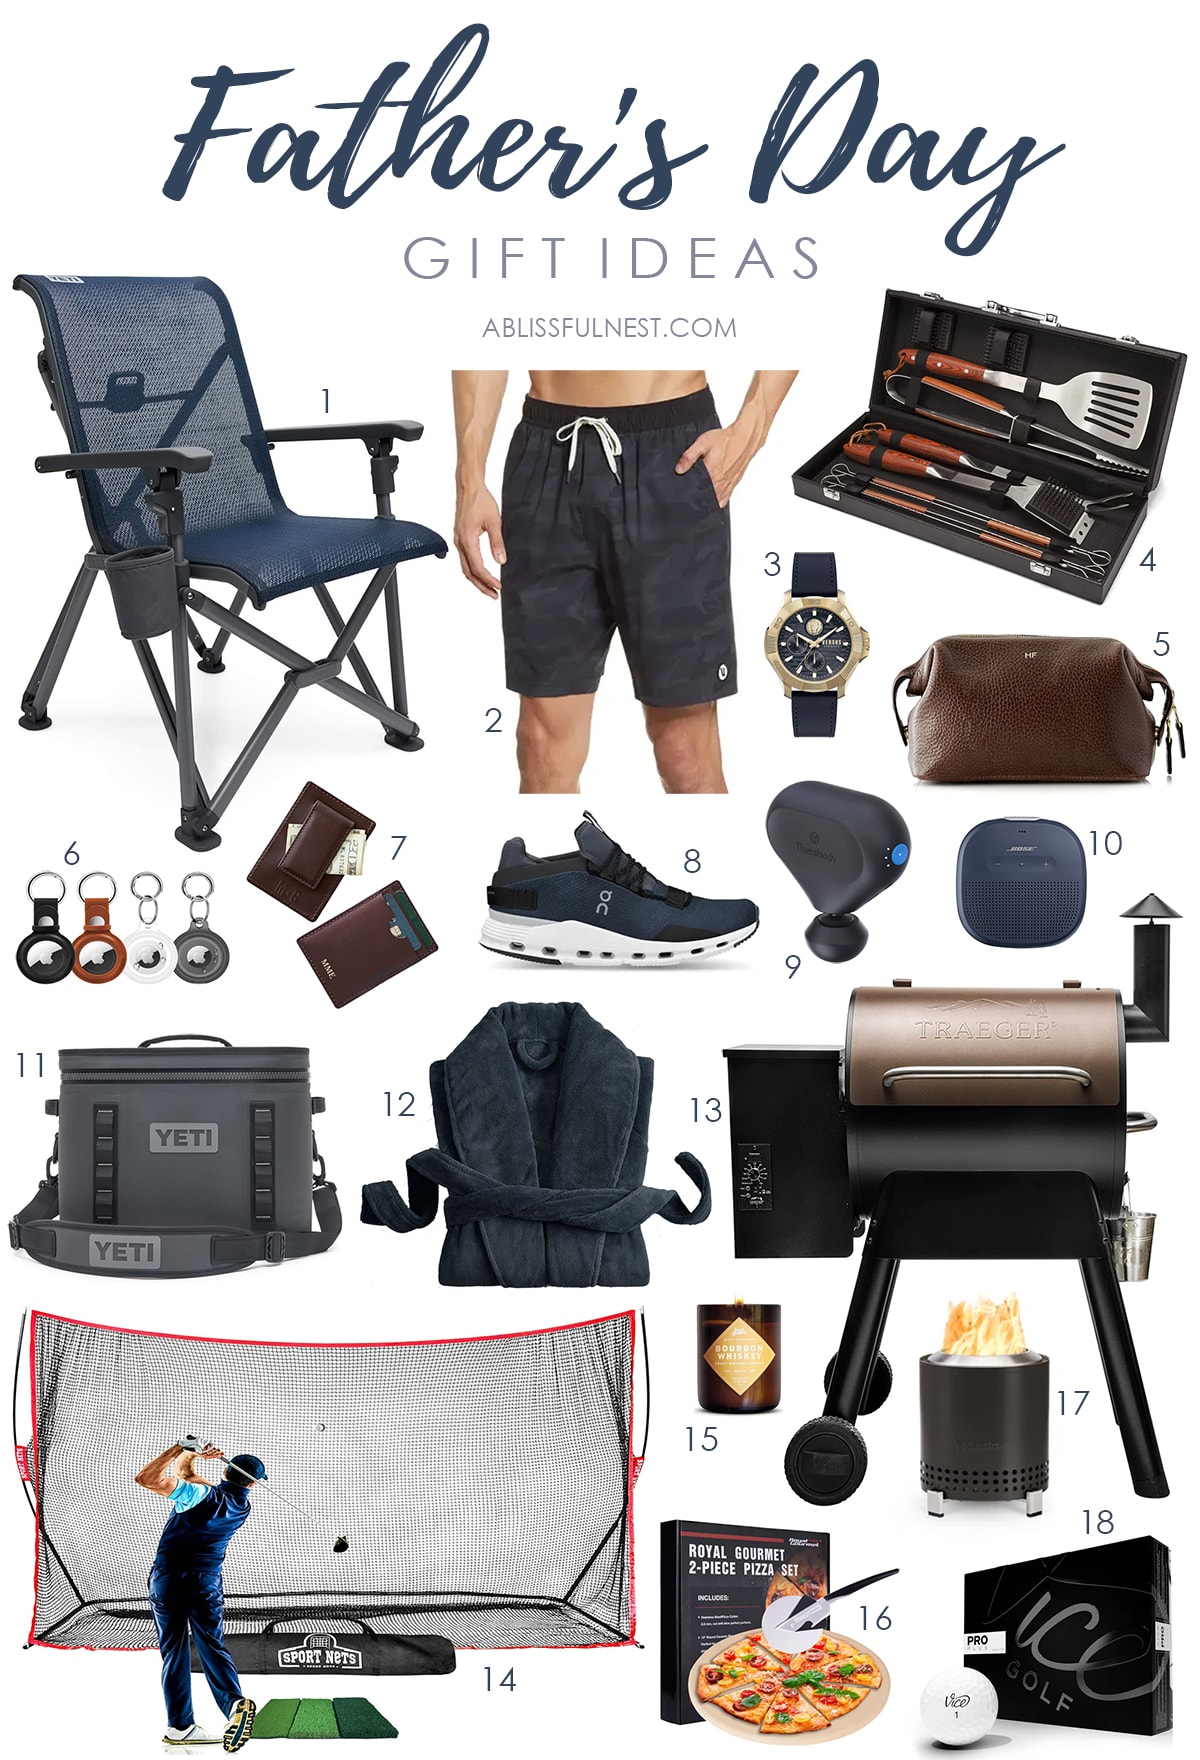 A collection of the best Father's Day gift ideas this season! Gifts for the sporty dad, gifts for the golf loving dad, gifts for the grilling dad, affordable Father's Day gifts and so much more! #ABlissfulNest